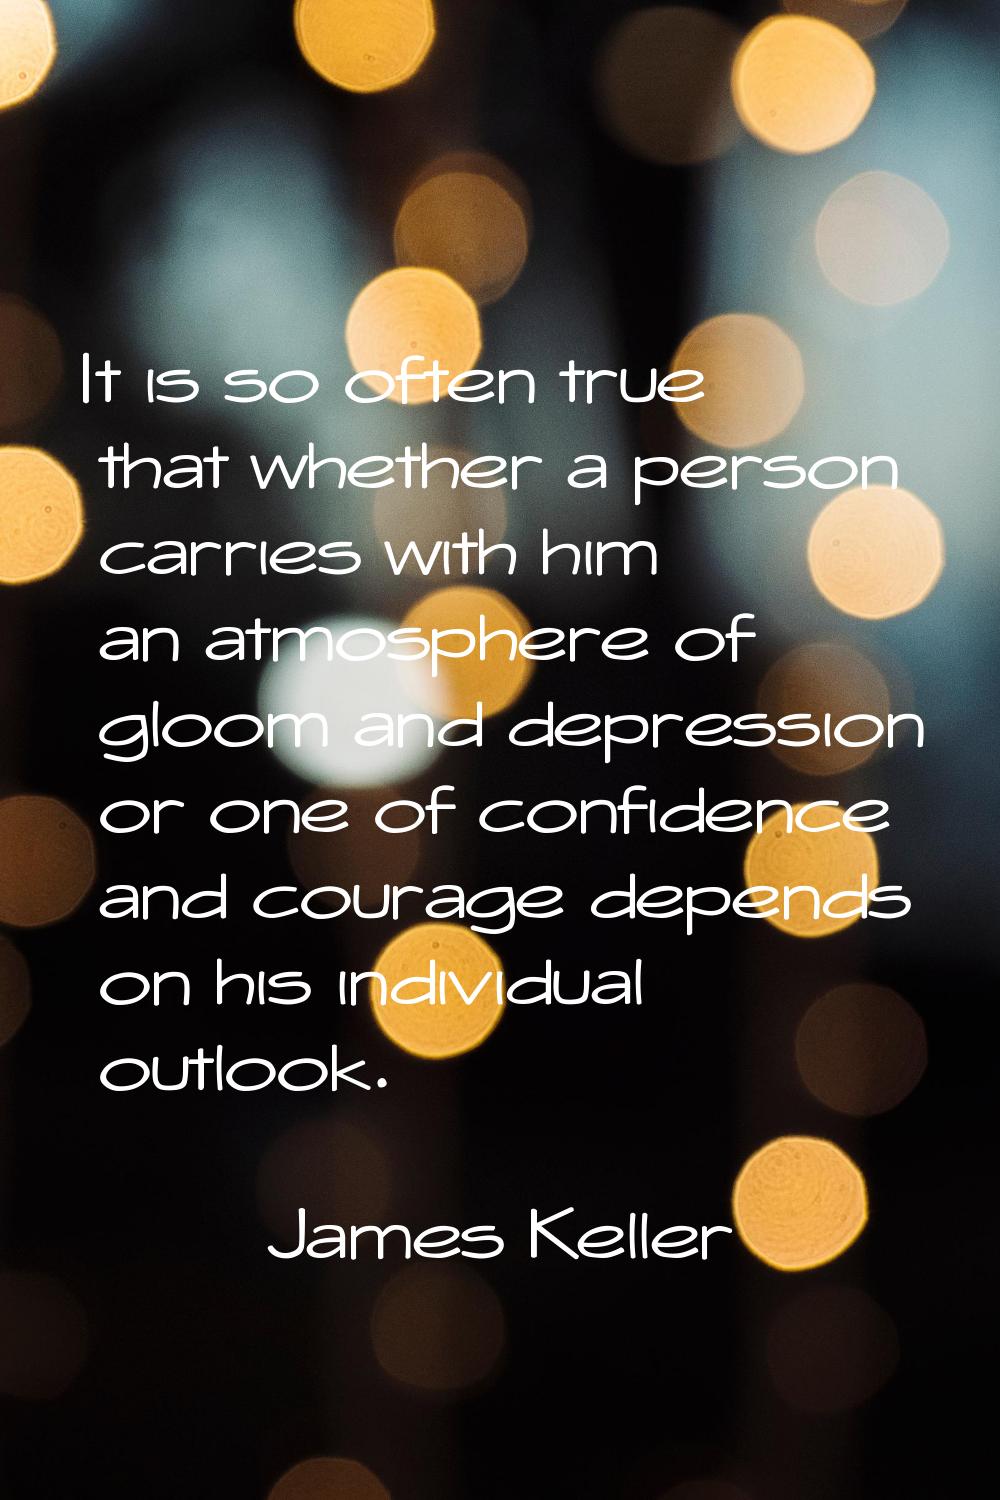 It is so often true that whether a person carries with him an atmosphere of gloom and depression or